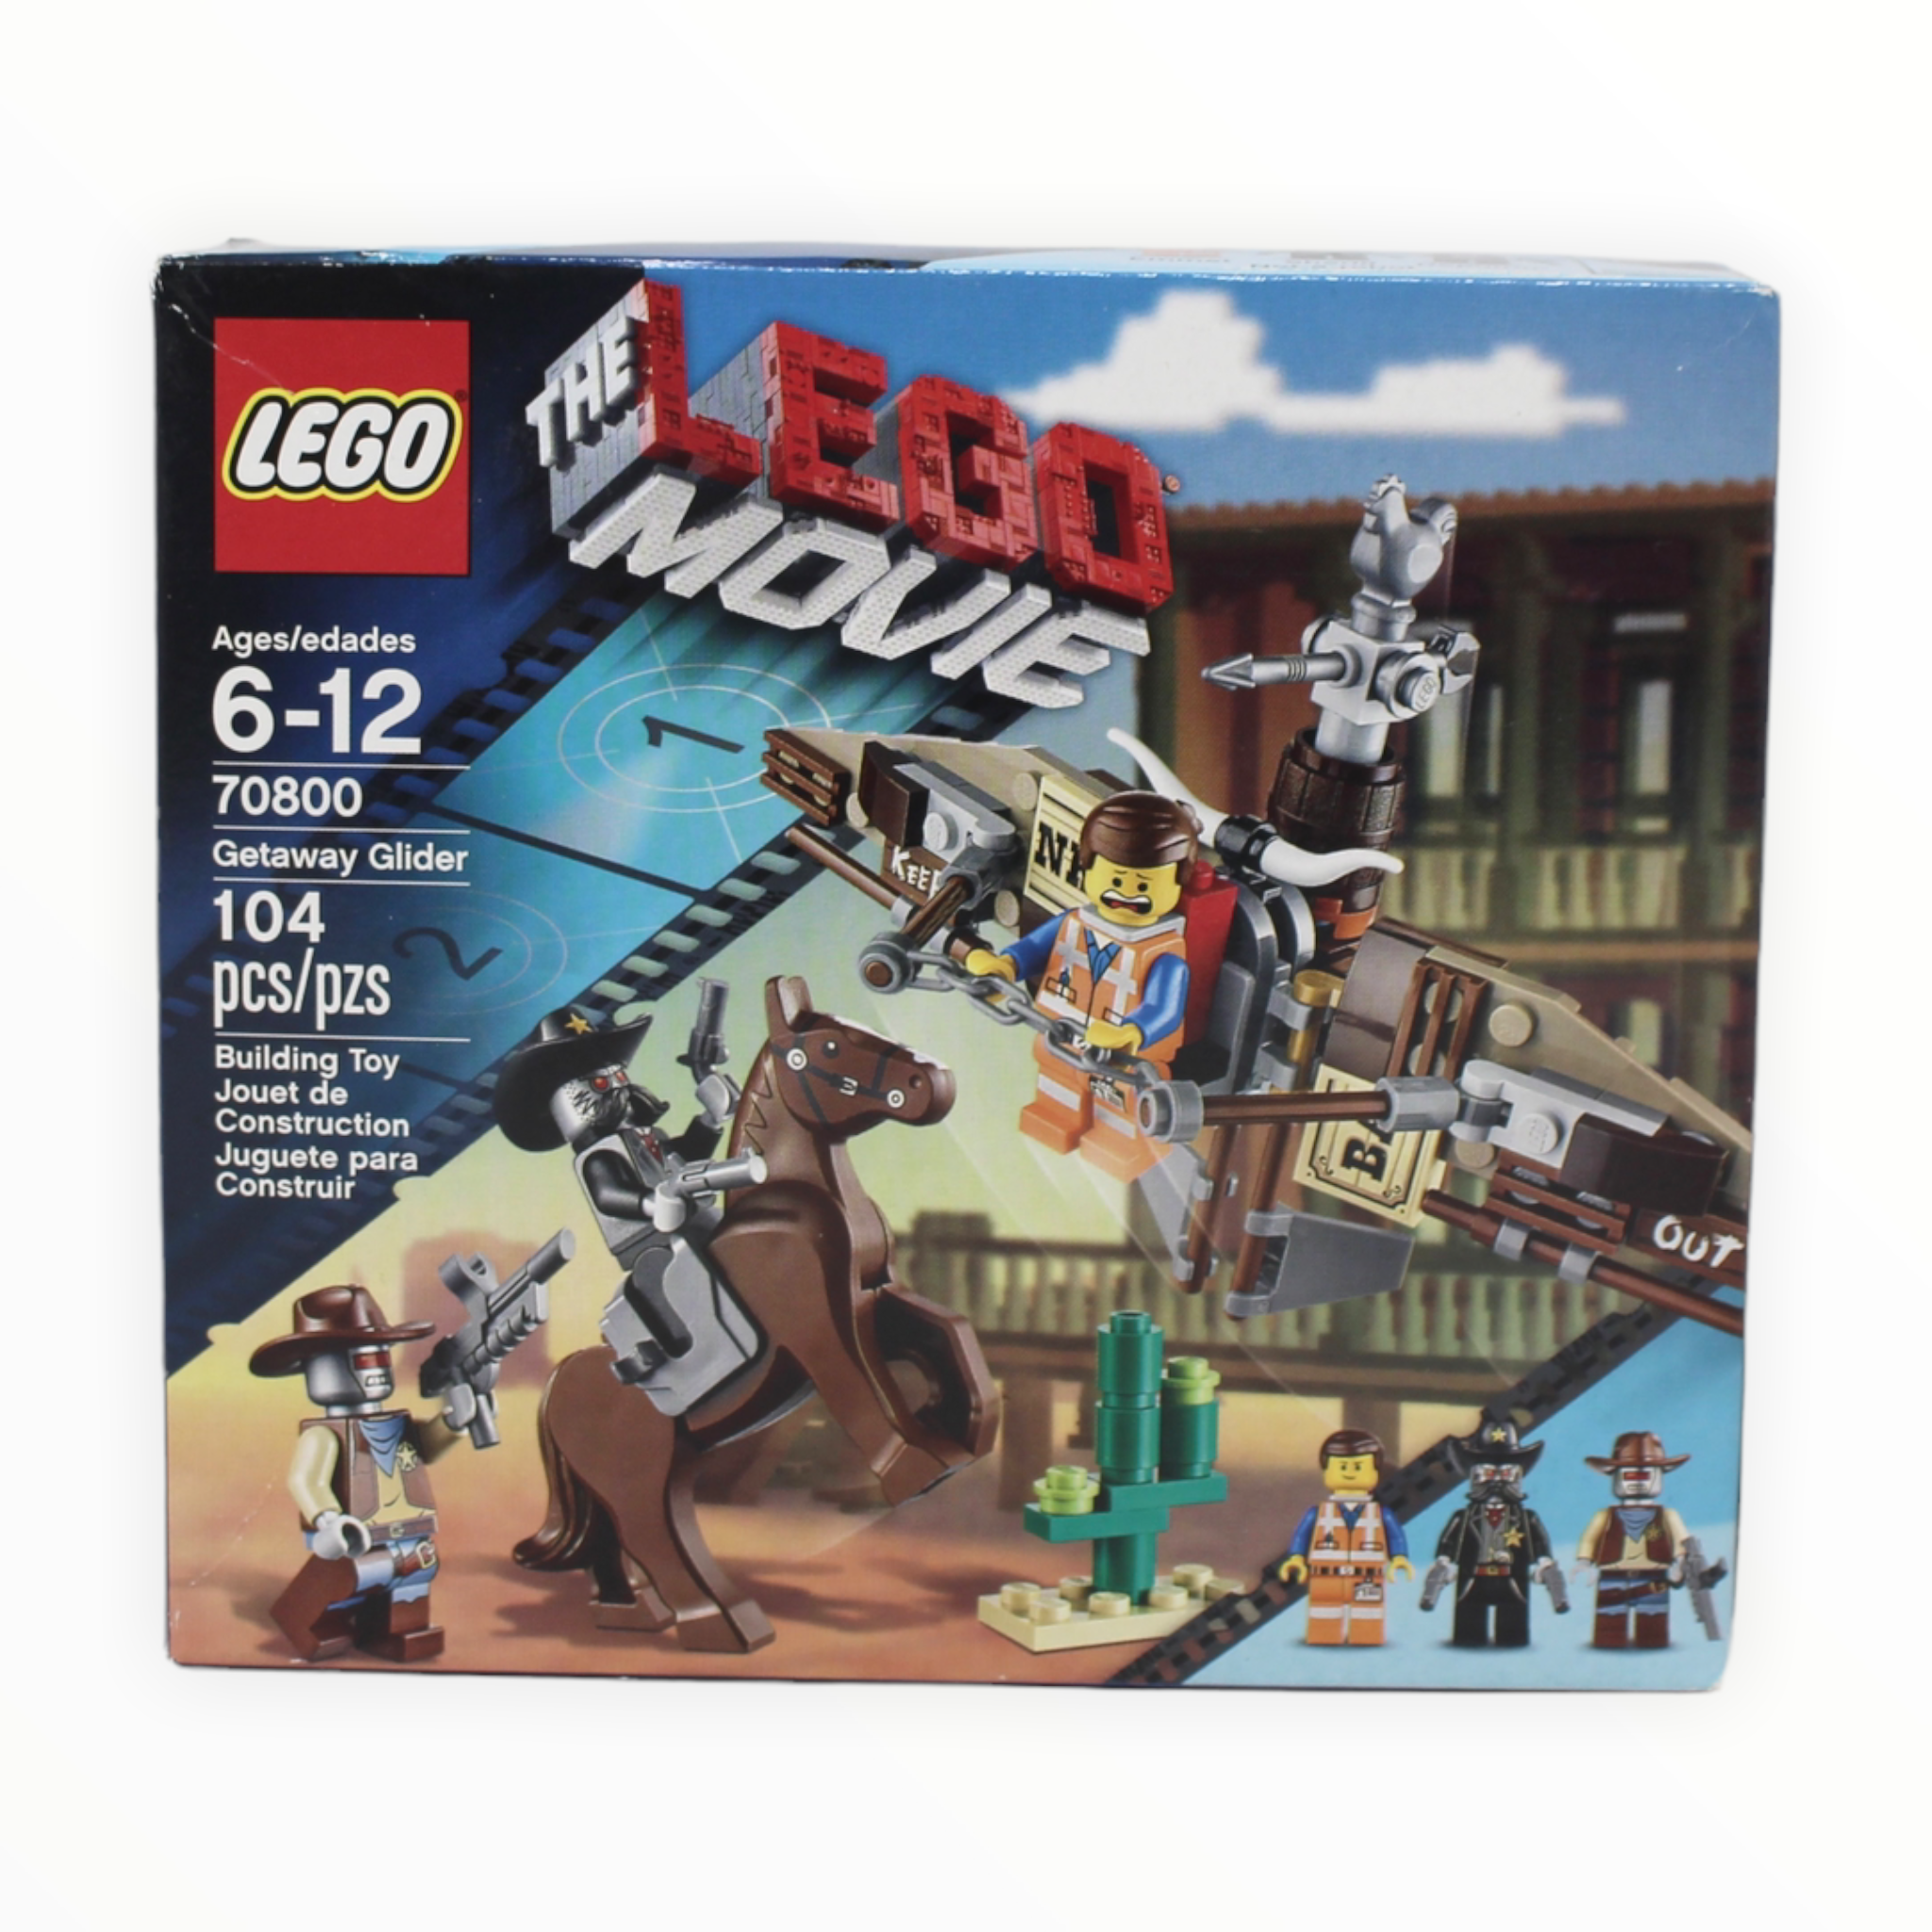 Certified Used Set 70800 The LEGO Movie Getaway Glider